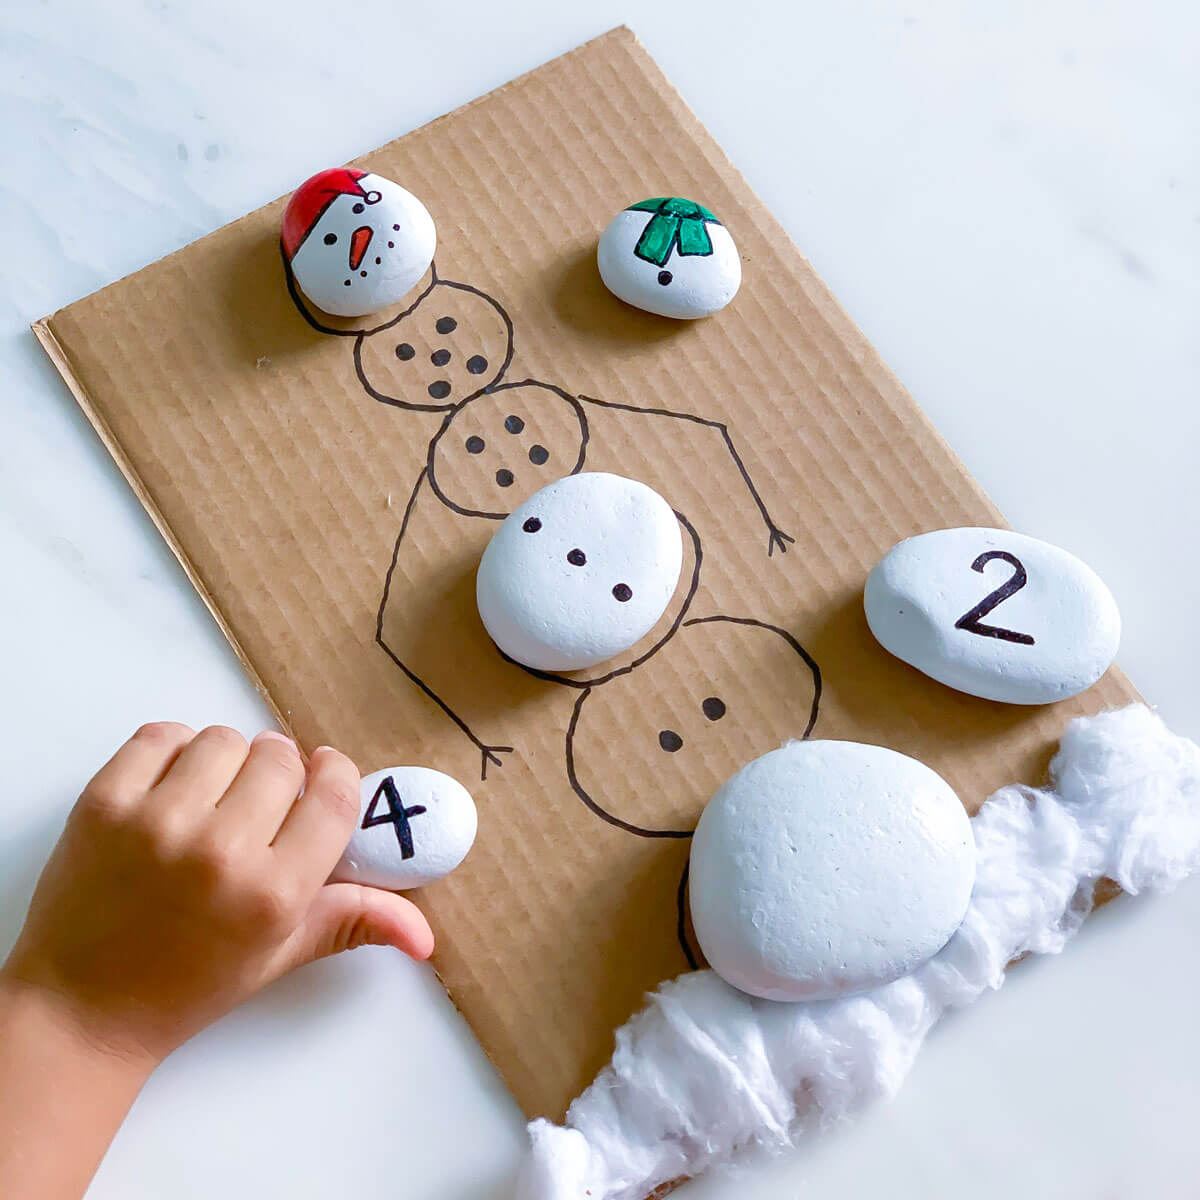 Fun Winter Activity – Make Your Own Snowman Puzzle